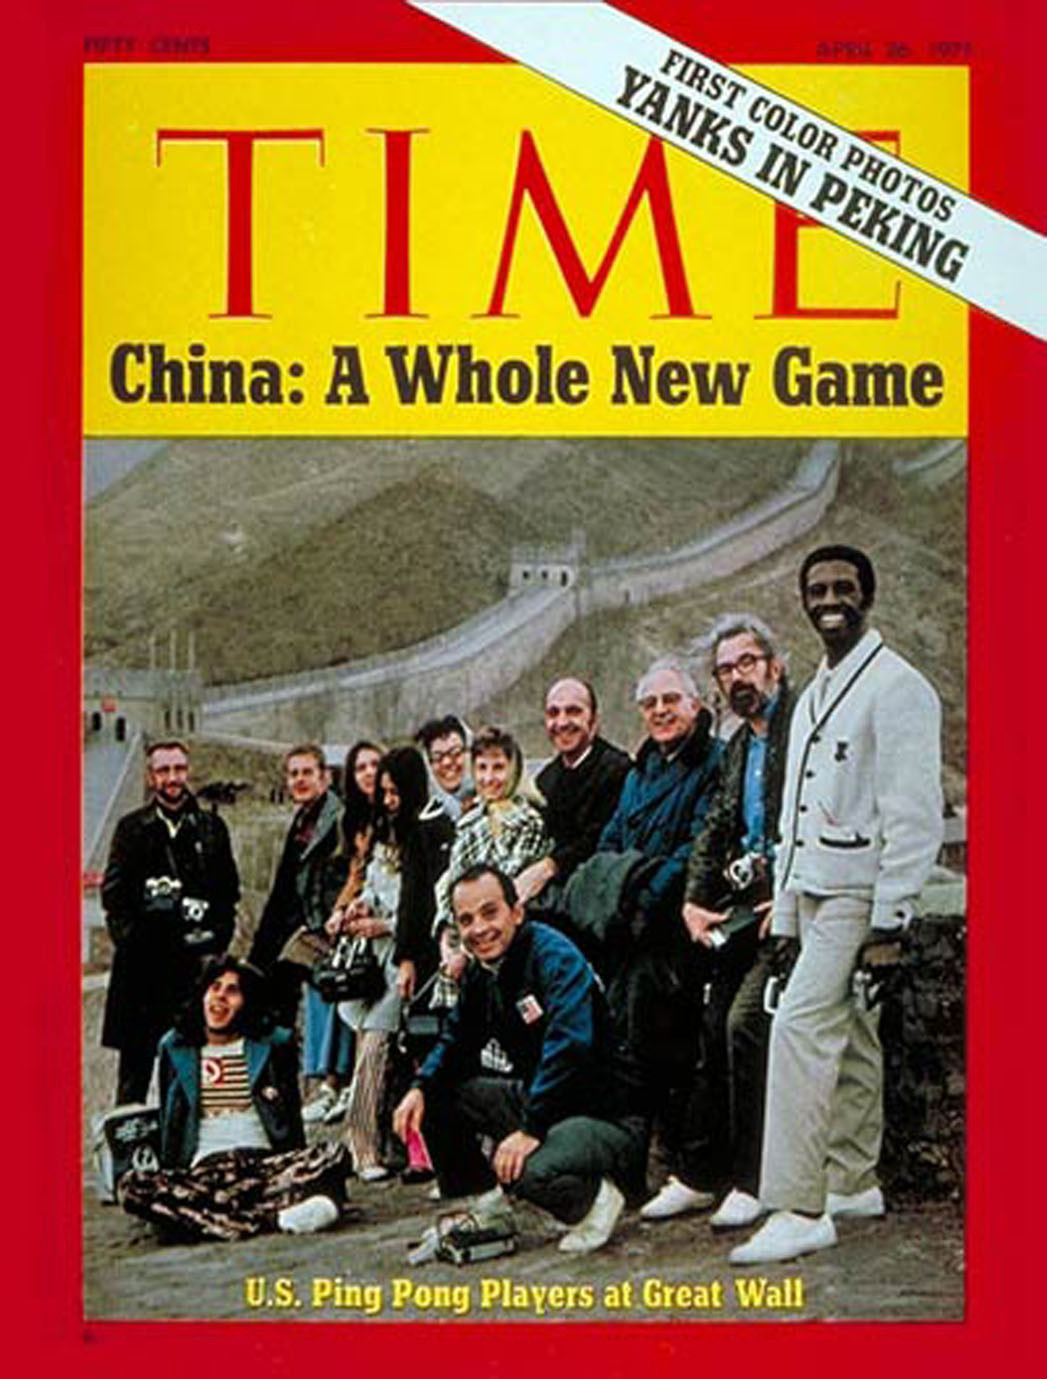 The American table tennis party who took up an impromptu invitation to visit China in April 1971, with icebreaker Glenn Cowan seated second left ©Time Magazine